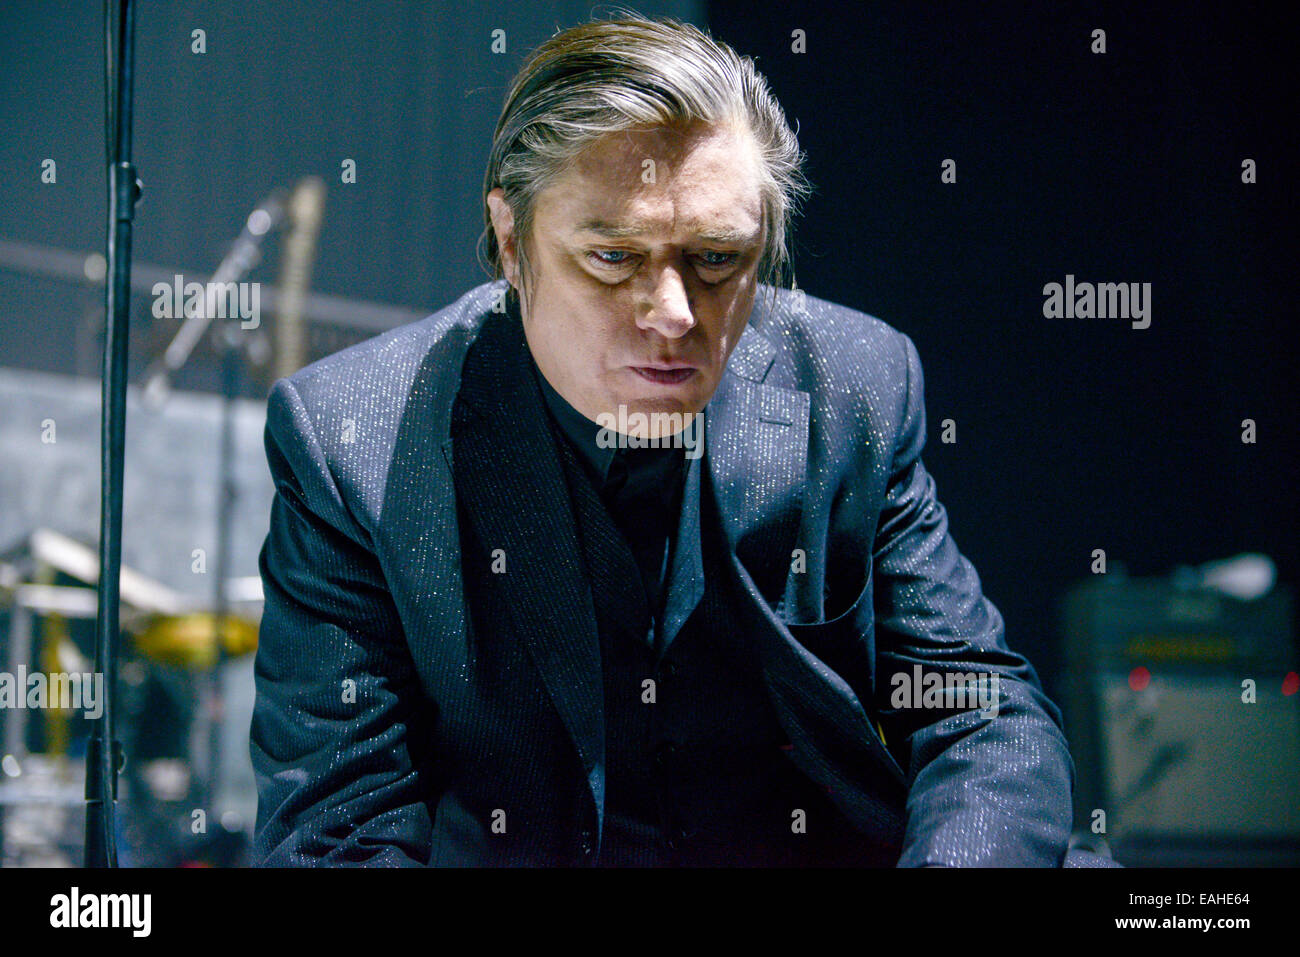 Blixa Bargeld, singer of the German band 'Einstuerzende Neubauten,' kneels on the edge of the stage during the concert in Tempodrom in Berlin, Germany, 11 November 2014. Their new album 'Lament,' which is deals with World War I, came out on 07 November 2014. Photo: Jason Harrell/dpa NO WIRE SERVICE Stock Photo